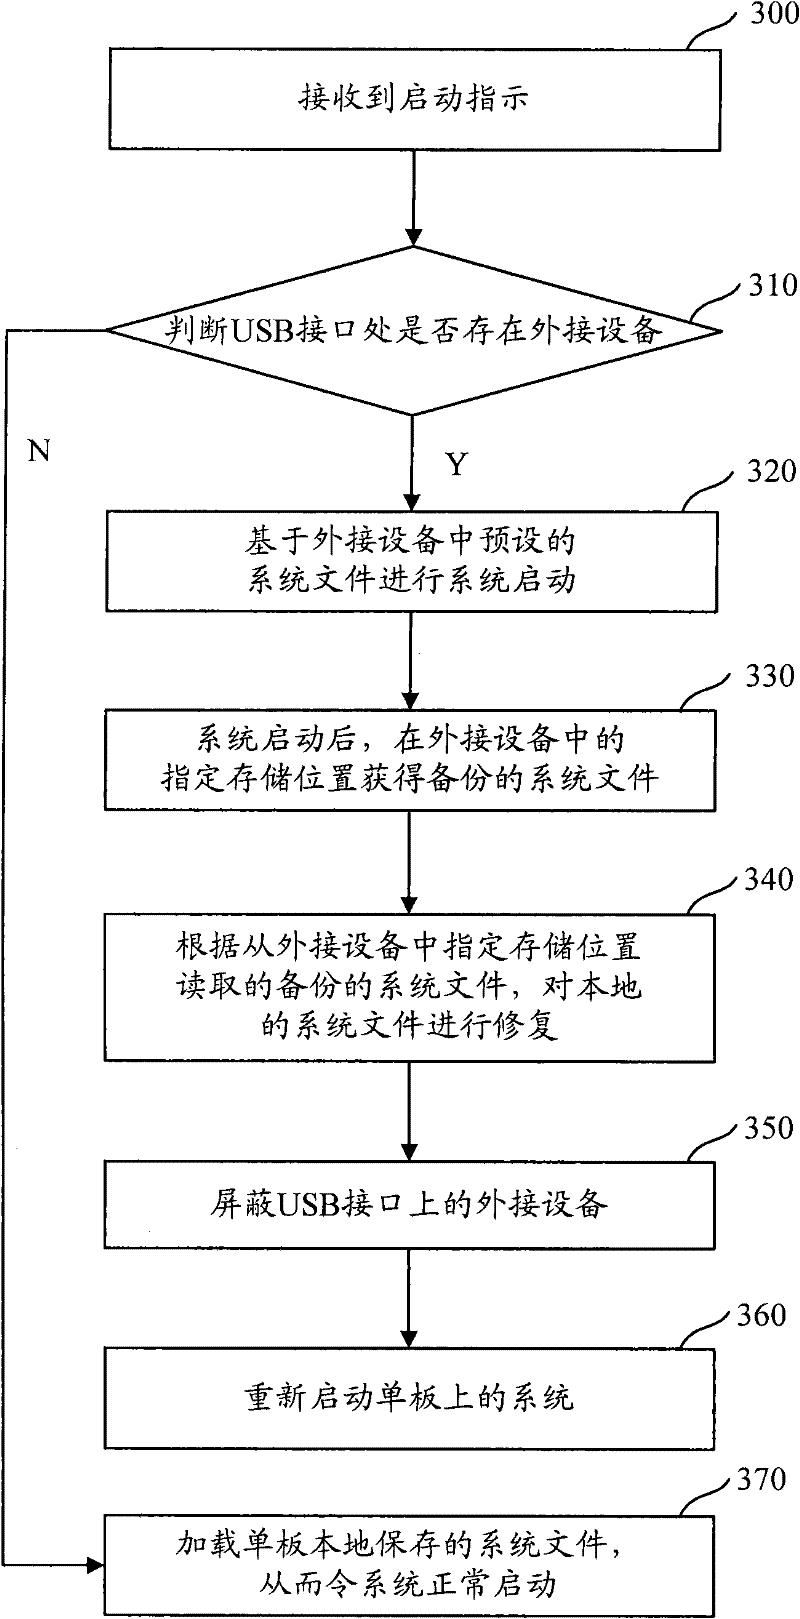 Method and device for repairing system file based on X86 architecture